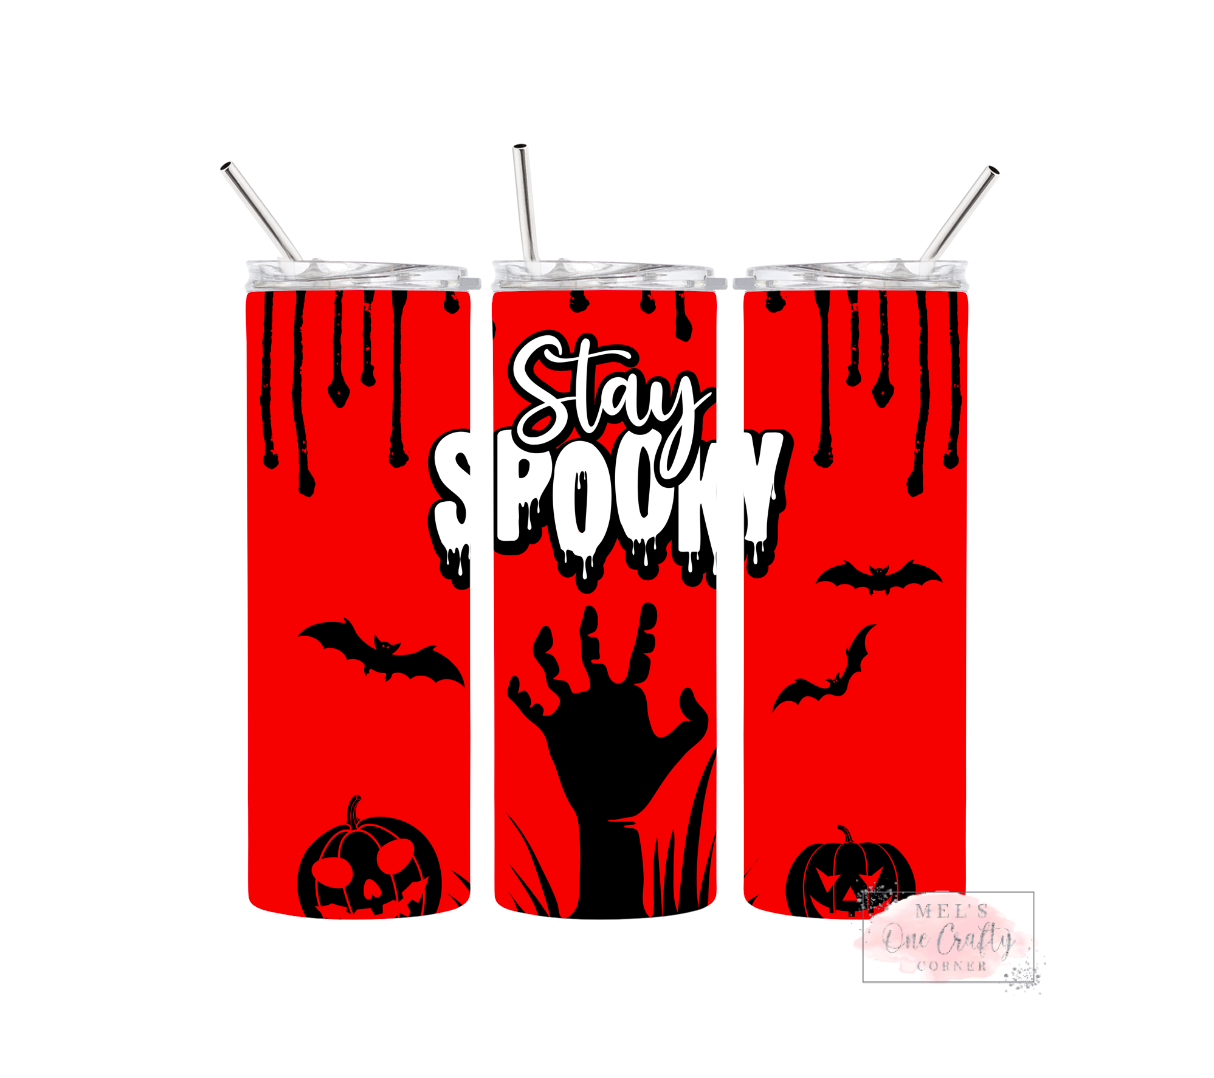 Sublimation Print Tumbler - Stay Spooky